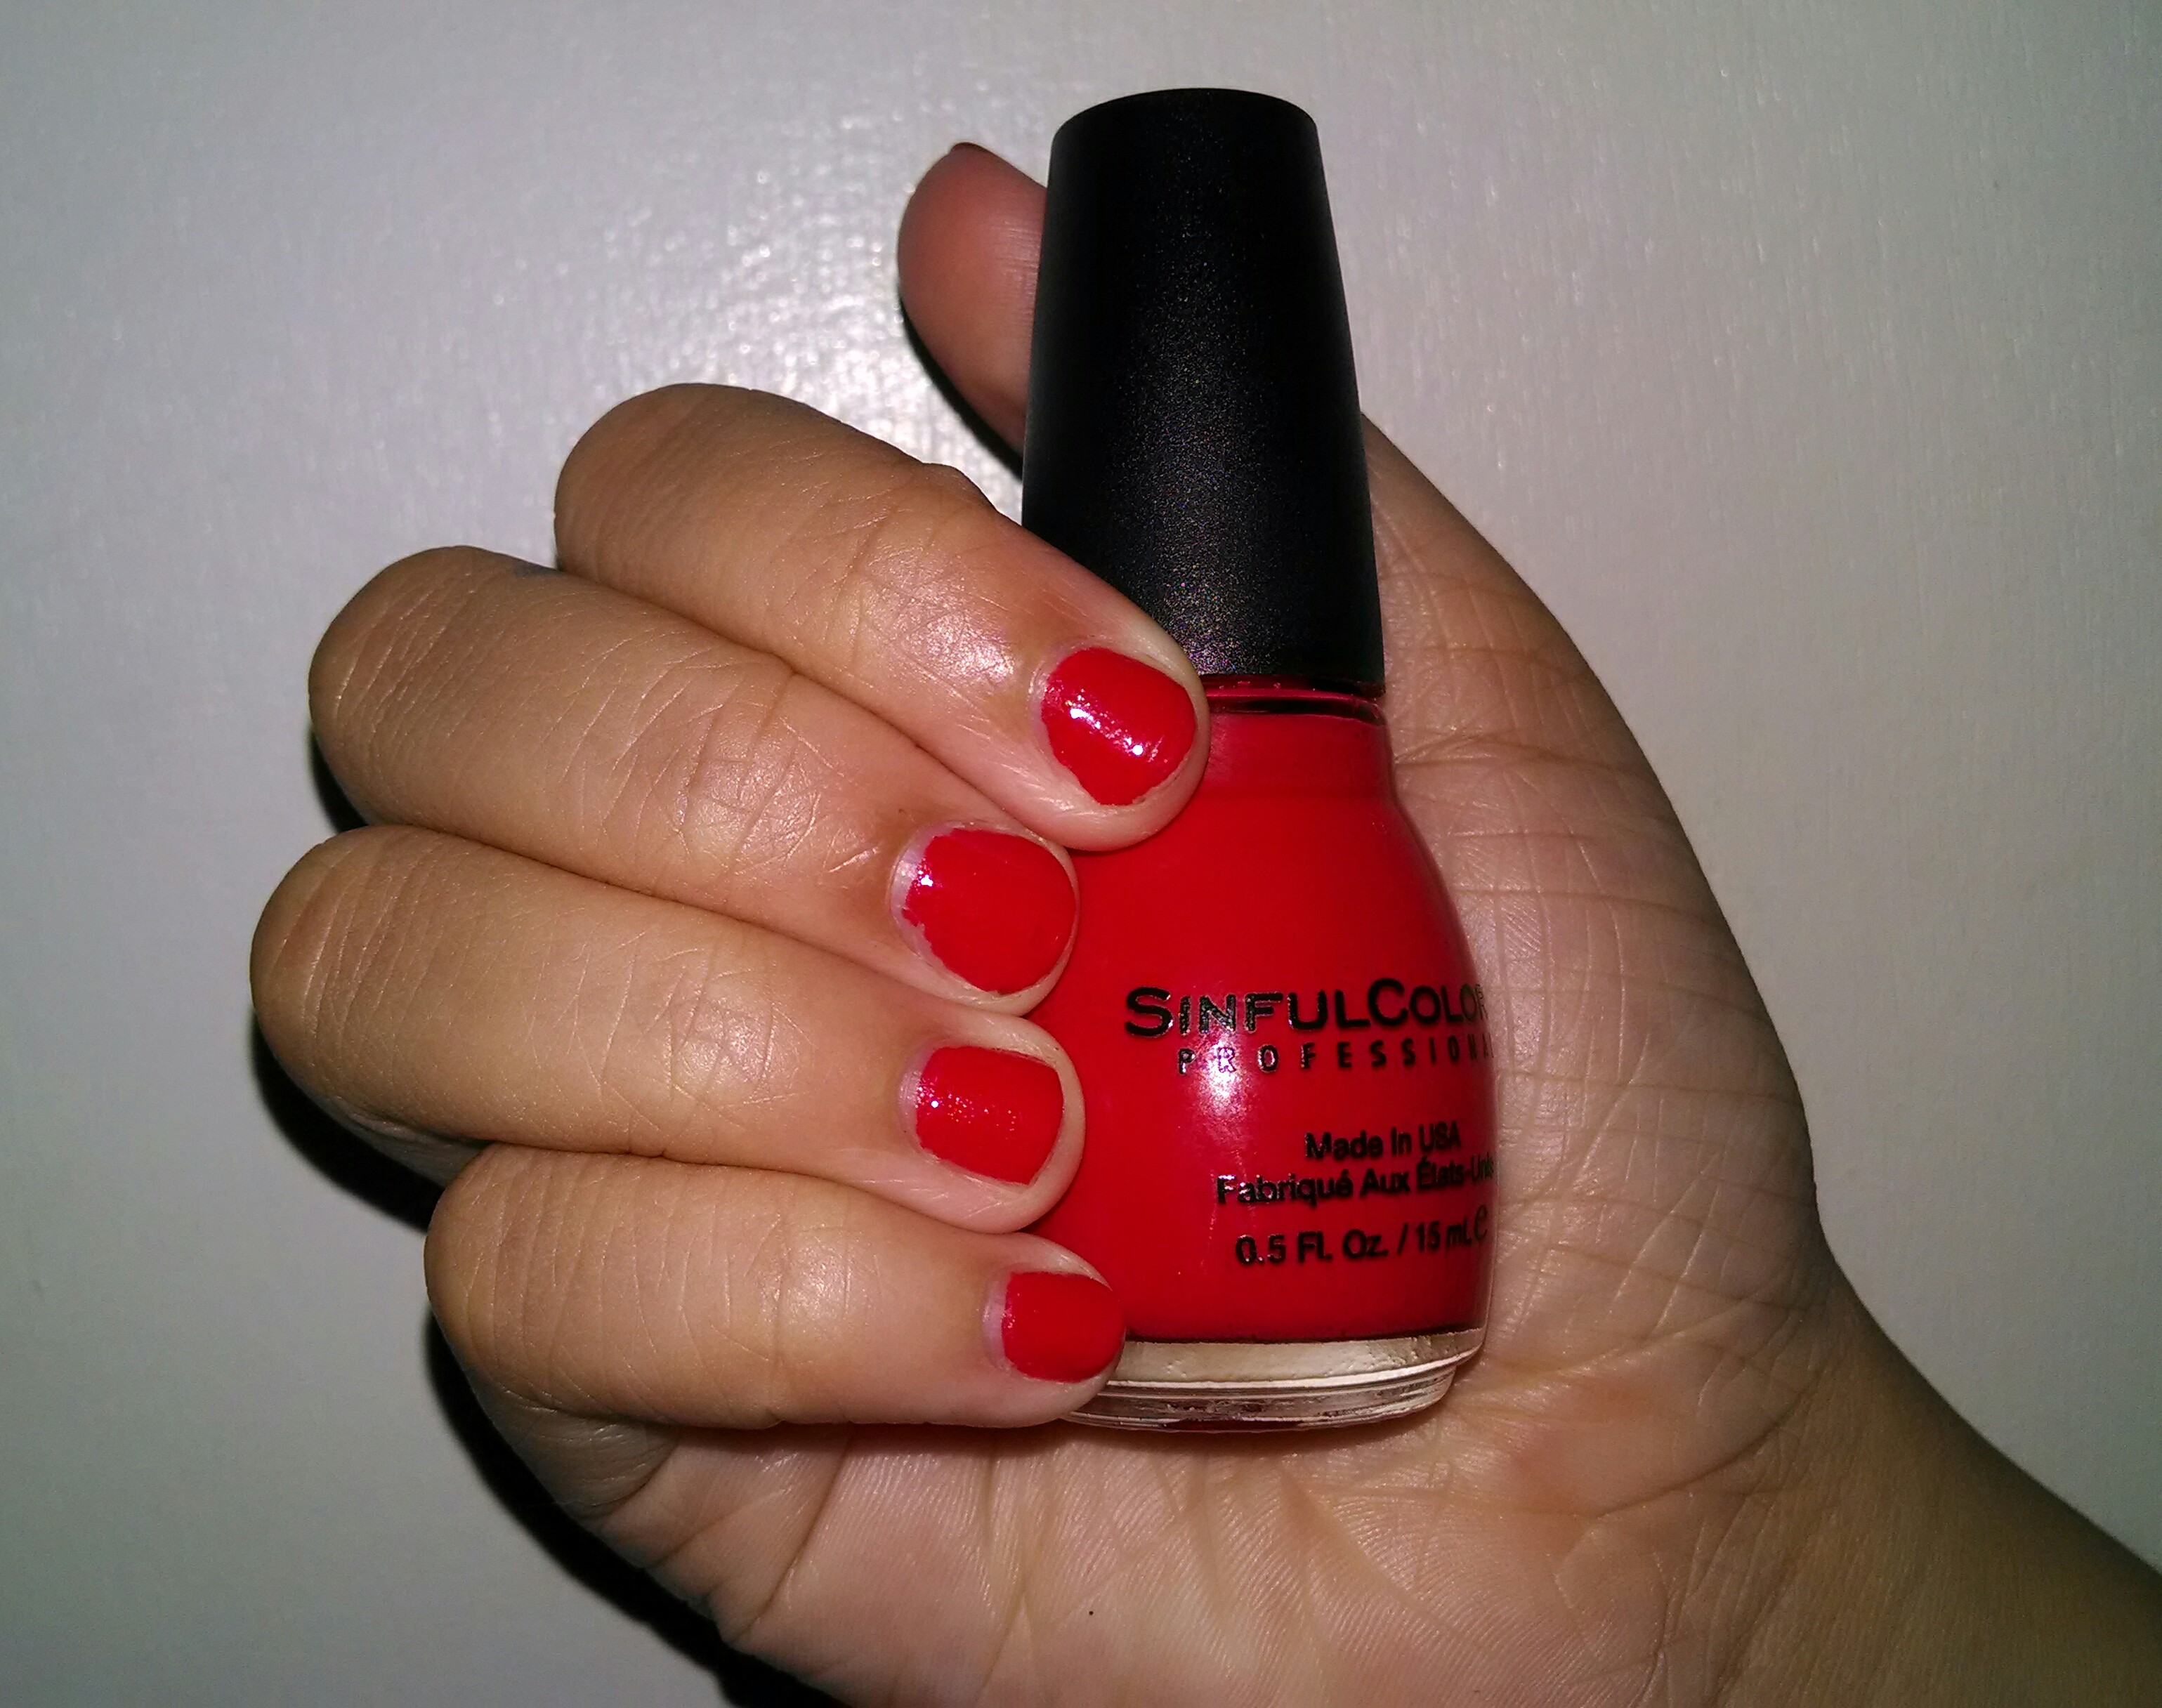 9. Sinful Colors Nail Polish - See You Later 947 - wide 6